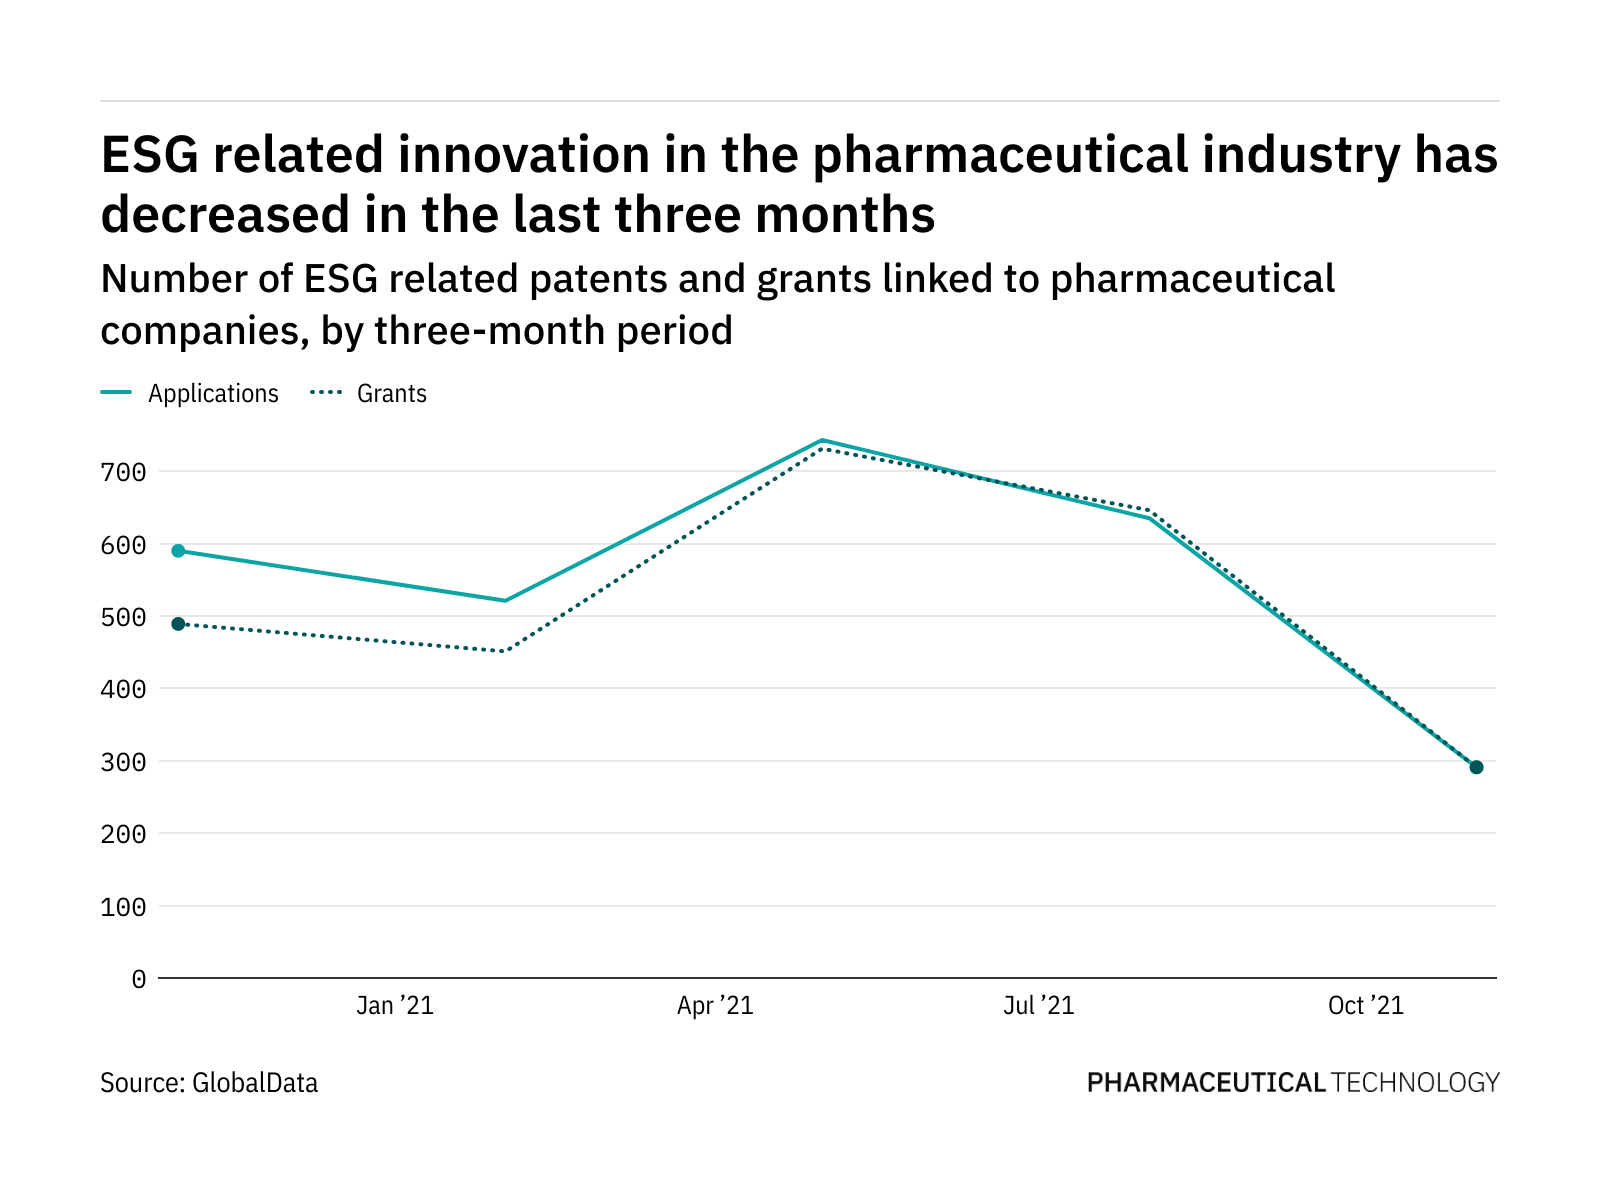 ESG innovation among pharma companies has dropped off in the last year